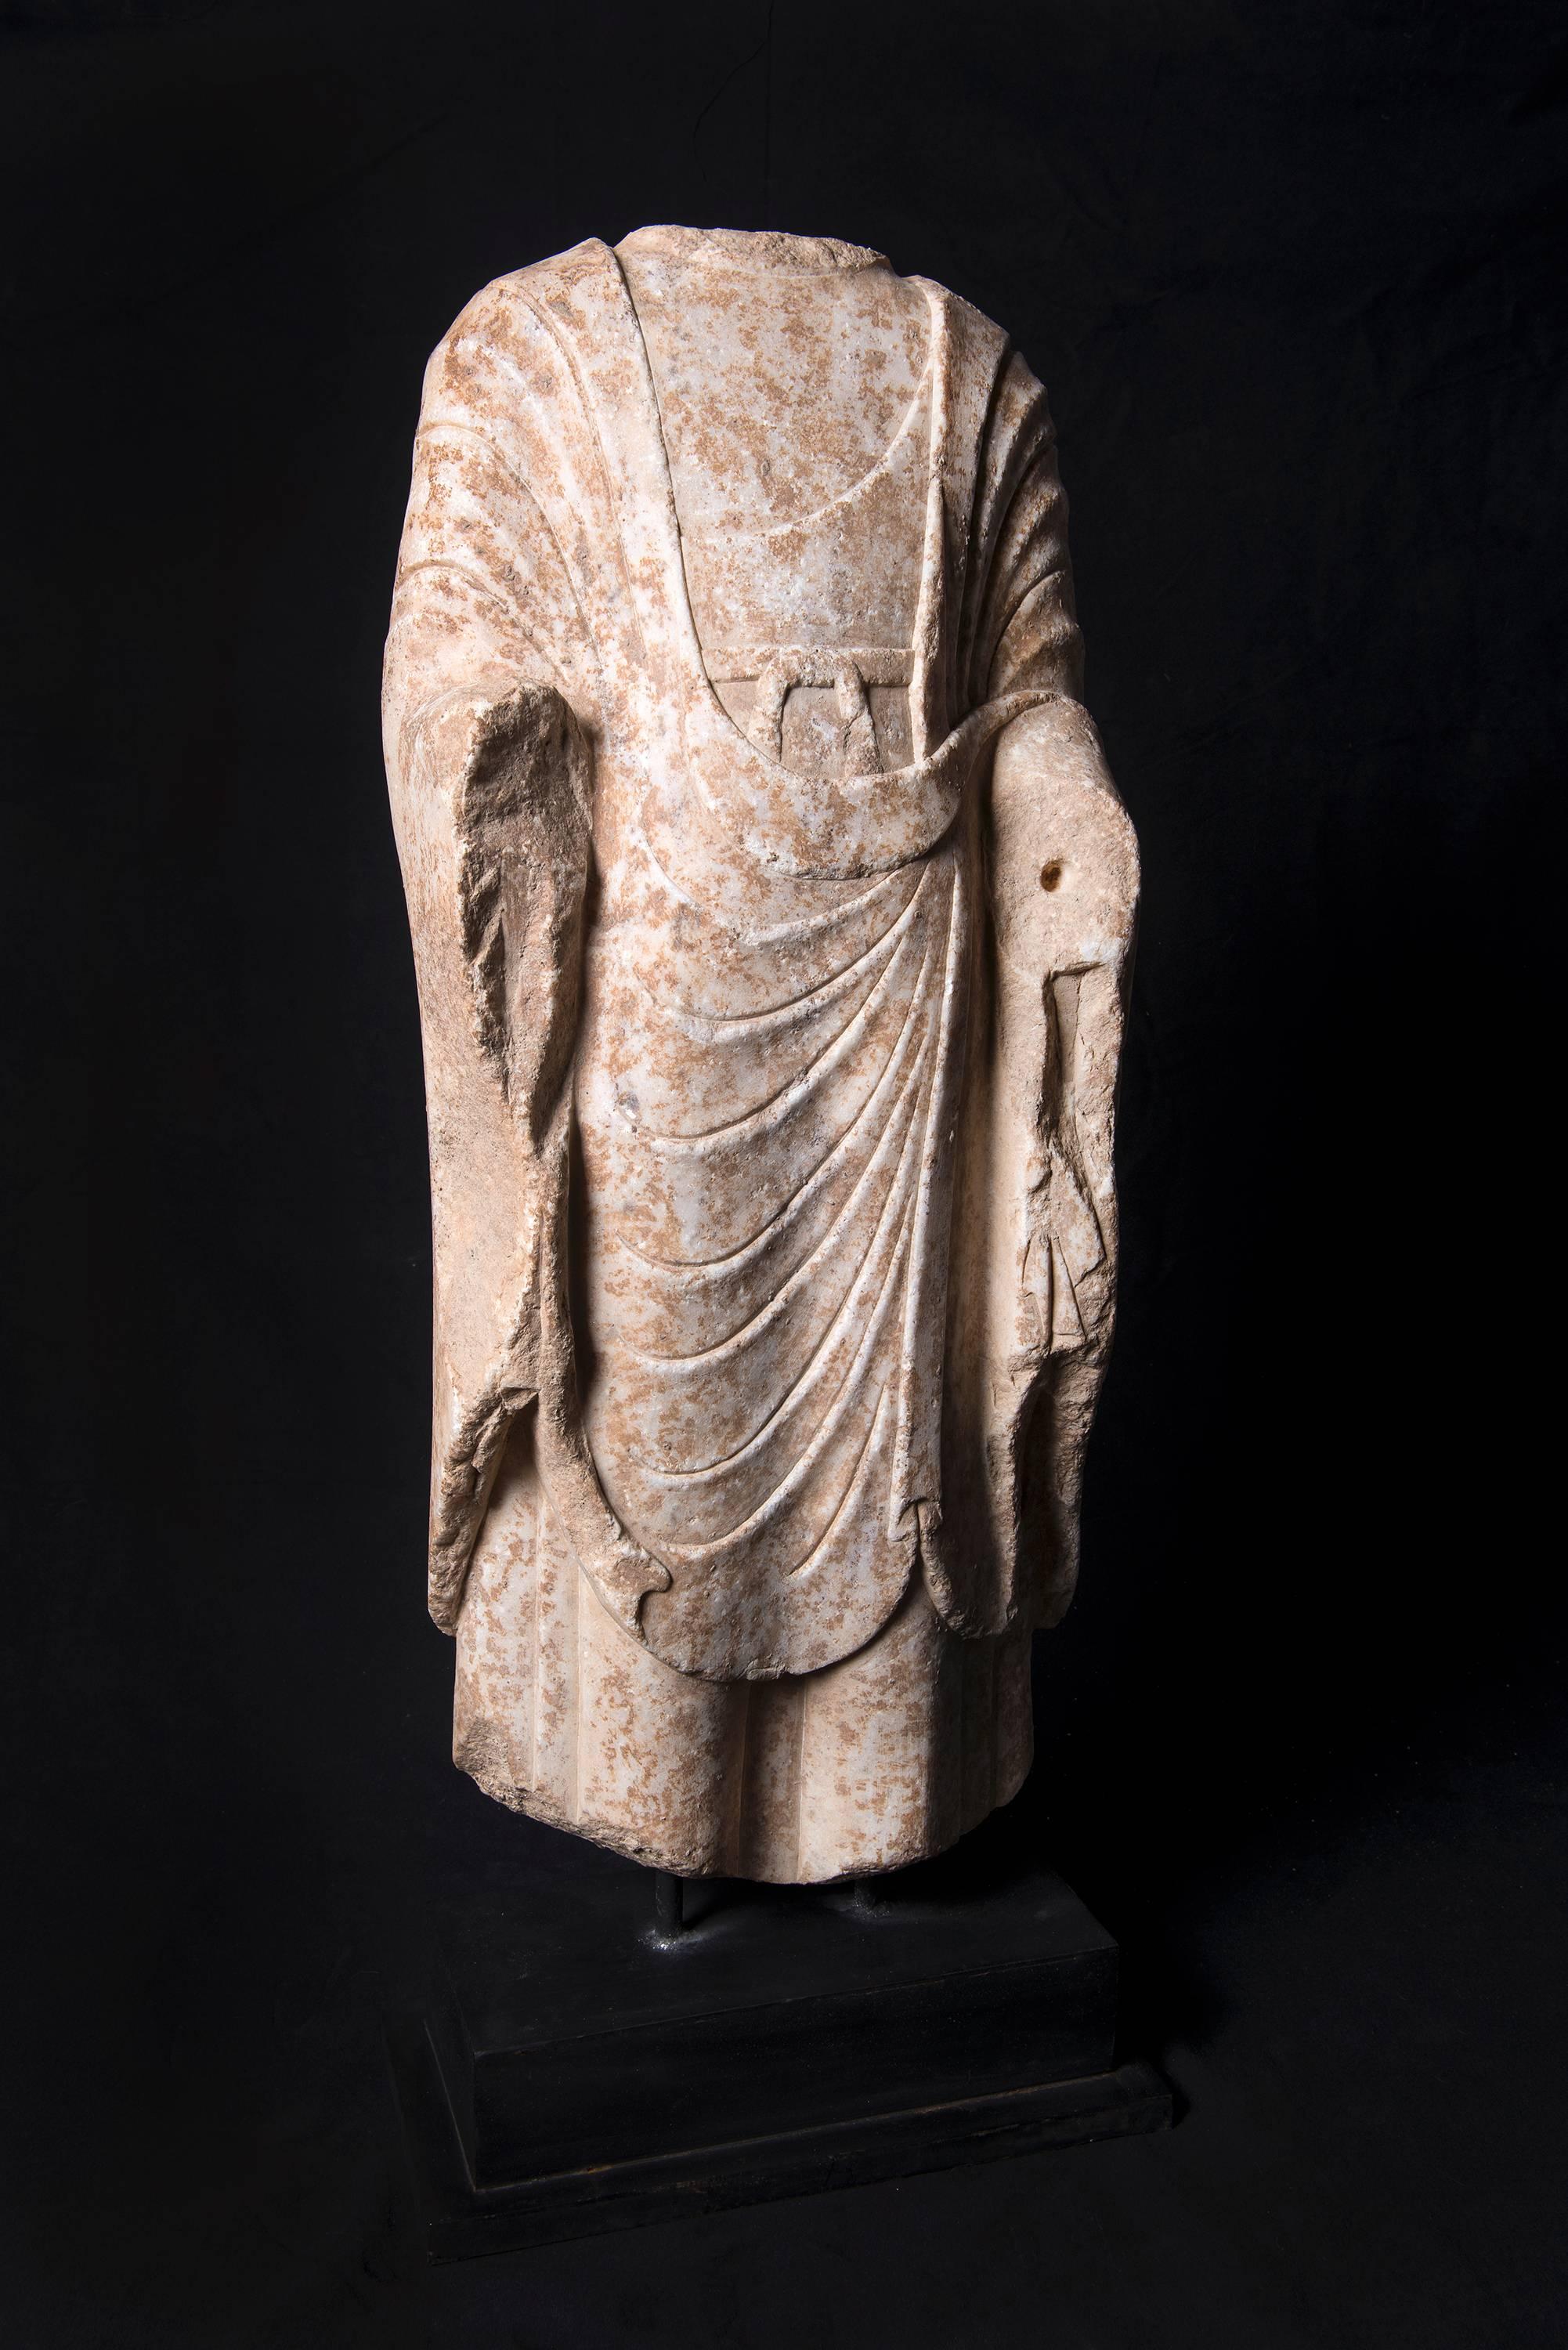 An impeccable example of ancient Chinese art. This substantial sculpture from the Tang dynasty (618-907 C.E.) is rendered in white marble. The torso of a Buddha draped in ceremonial robes, finished with an expert hand and exacting